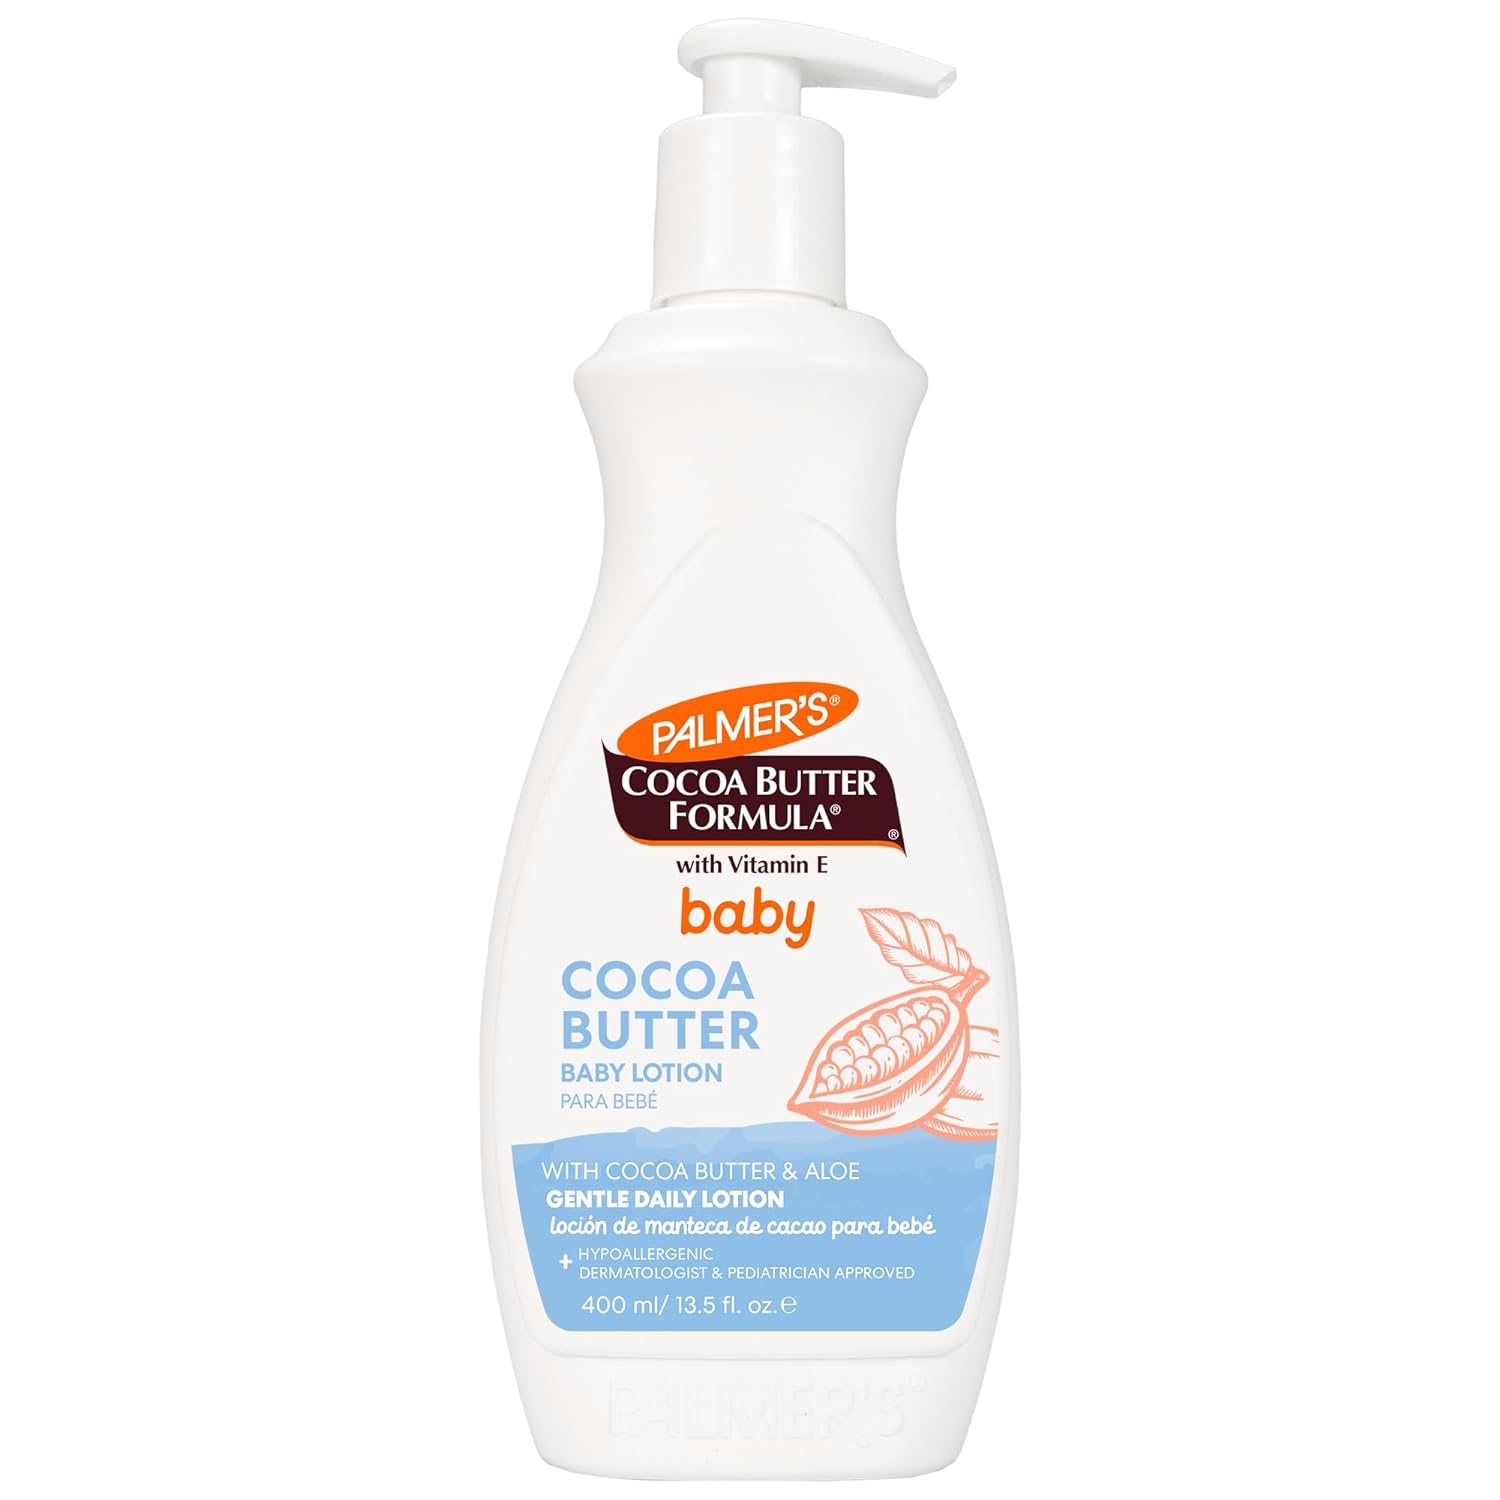 Palmer's Baby Lotion, Cocoa Butter Formula Body Lotion, 13.5 Fl Oz, Gentle Baby Moisturizer for Delicate Skin with Vitamin E & Aloe, Hypoallergenic, 48Hr Moisture, Dermatologist Tested Baby Essentials